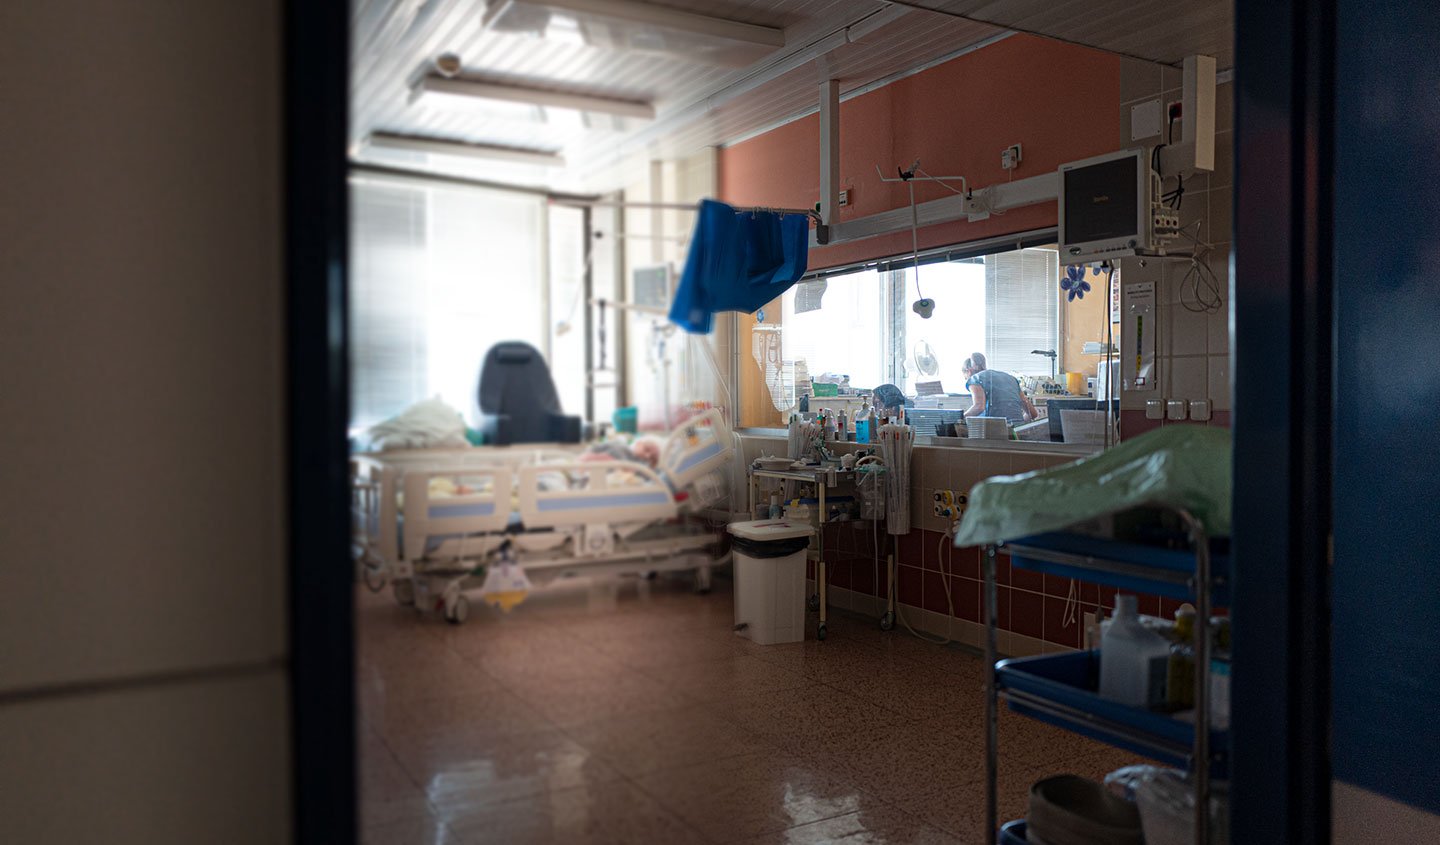 View into hospital room with patient in bed and nurse standing nearby